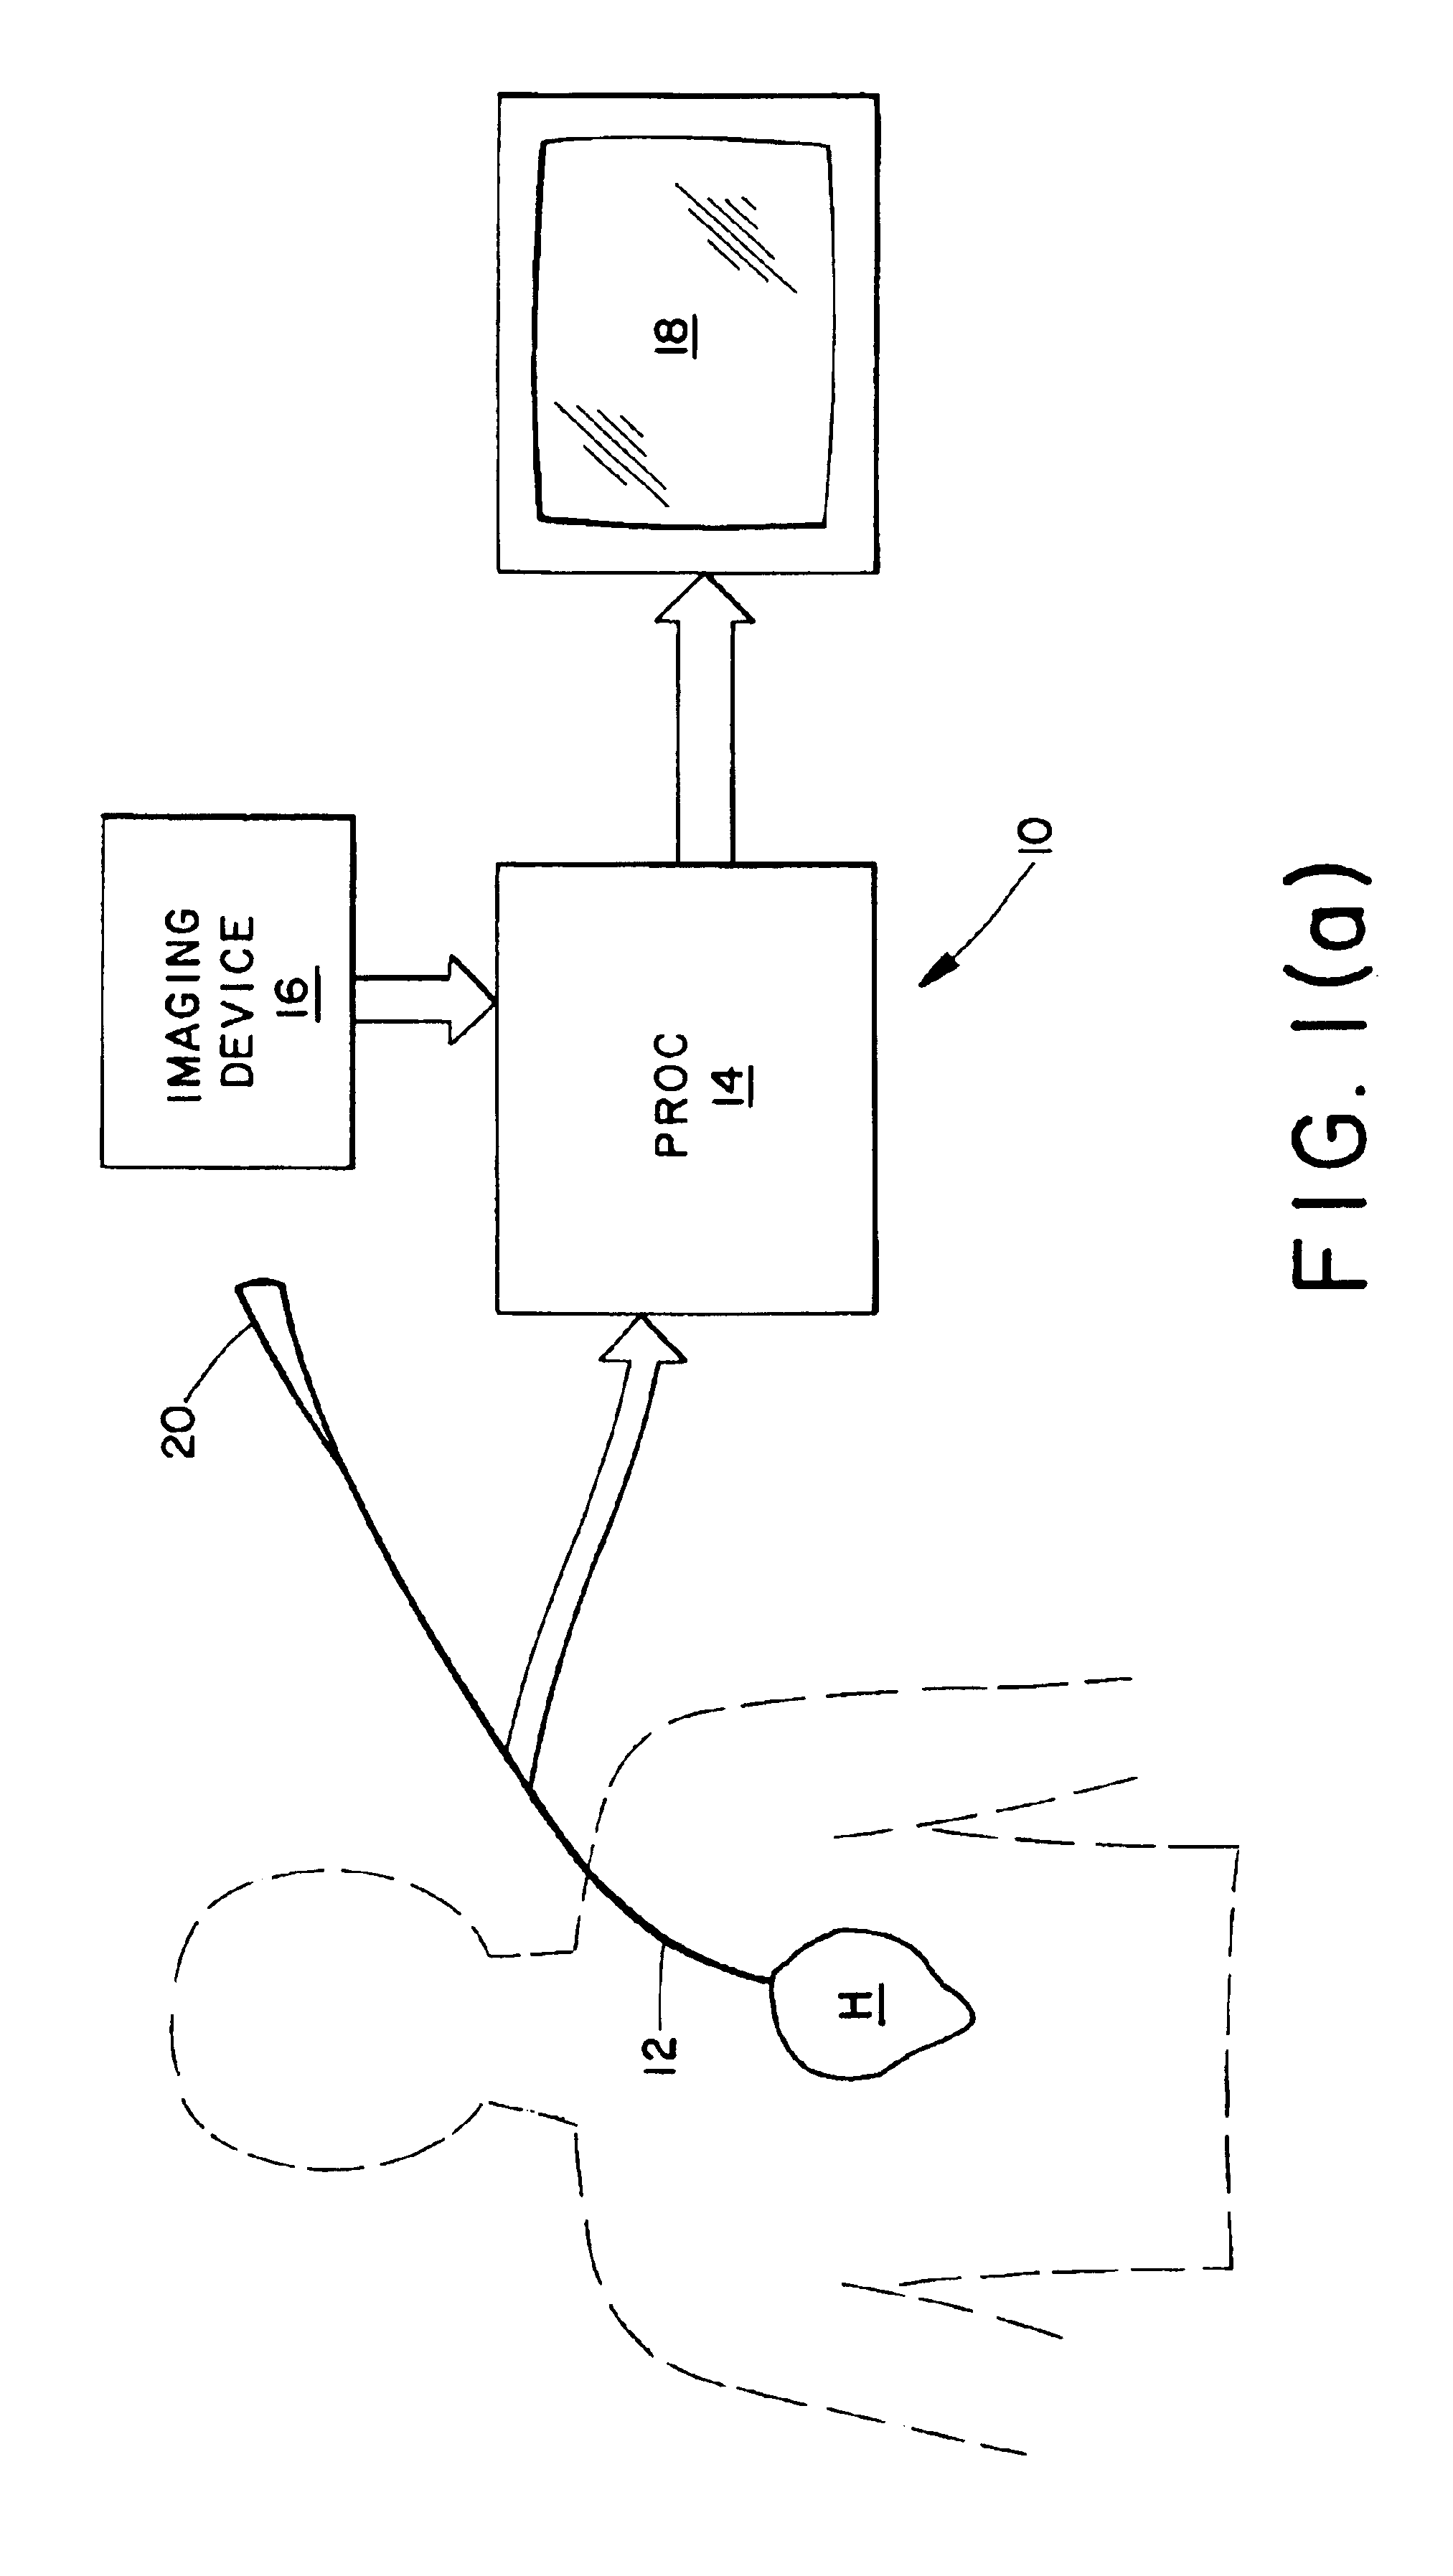 Electrophysiological cardiac mapping system based on a non-contact non-expandable miniature multi-electrode catheter and method therefor